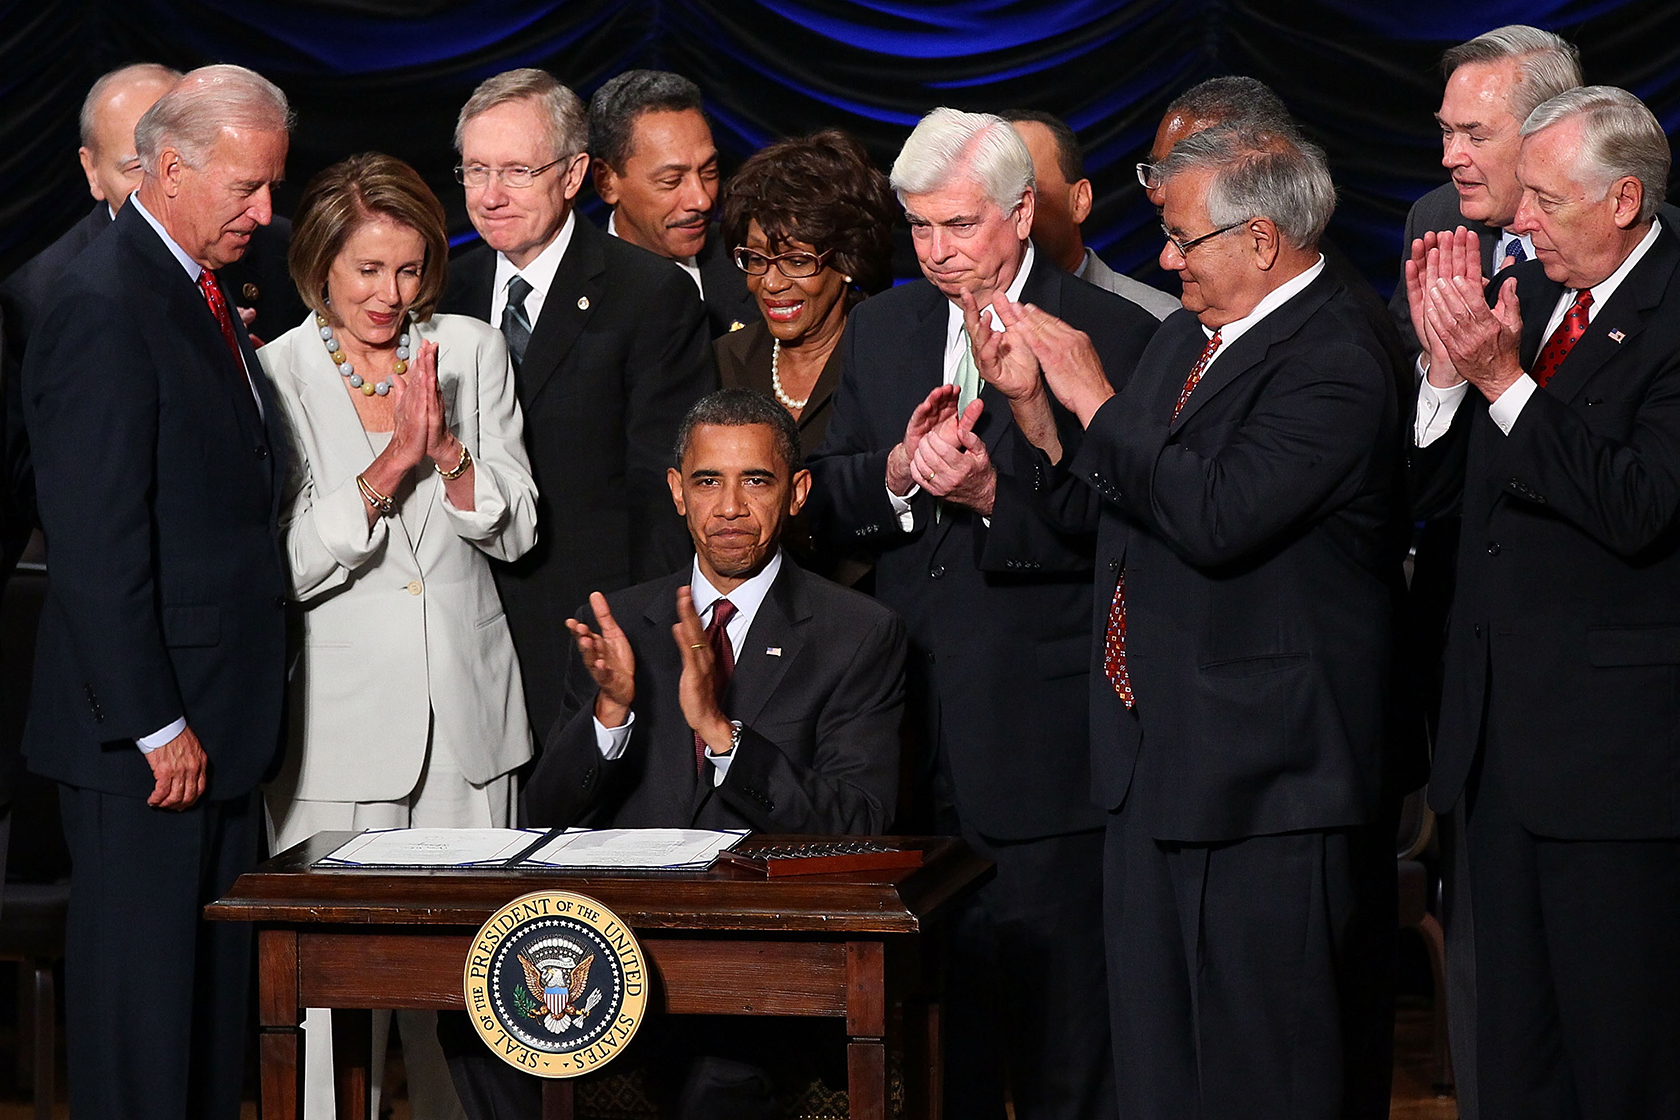 President Barack Obama signing act, surrounded by lawmakers